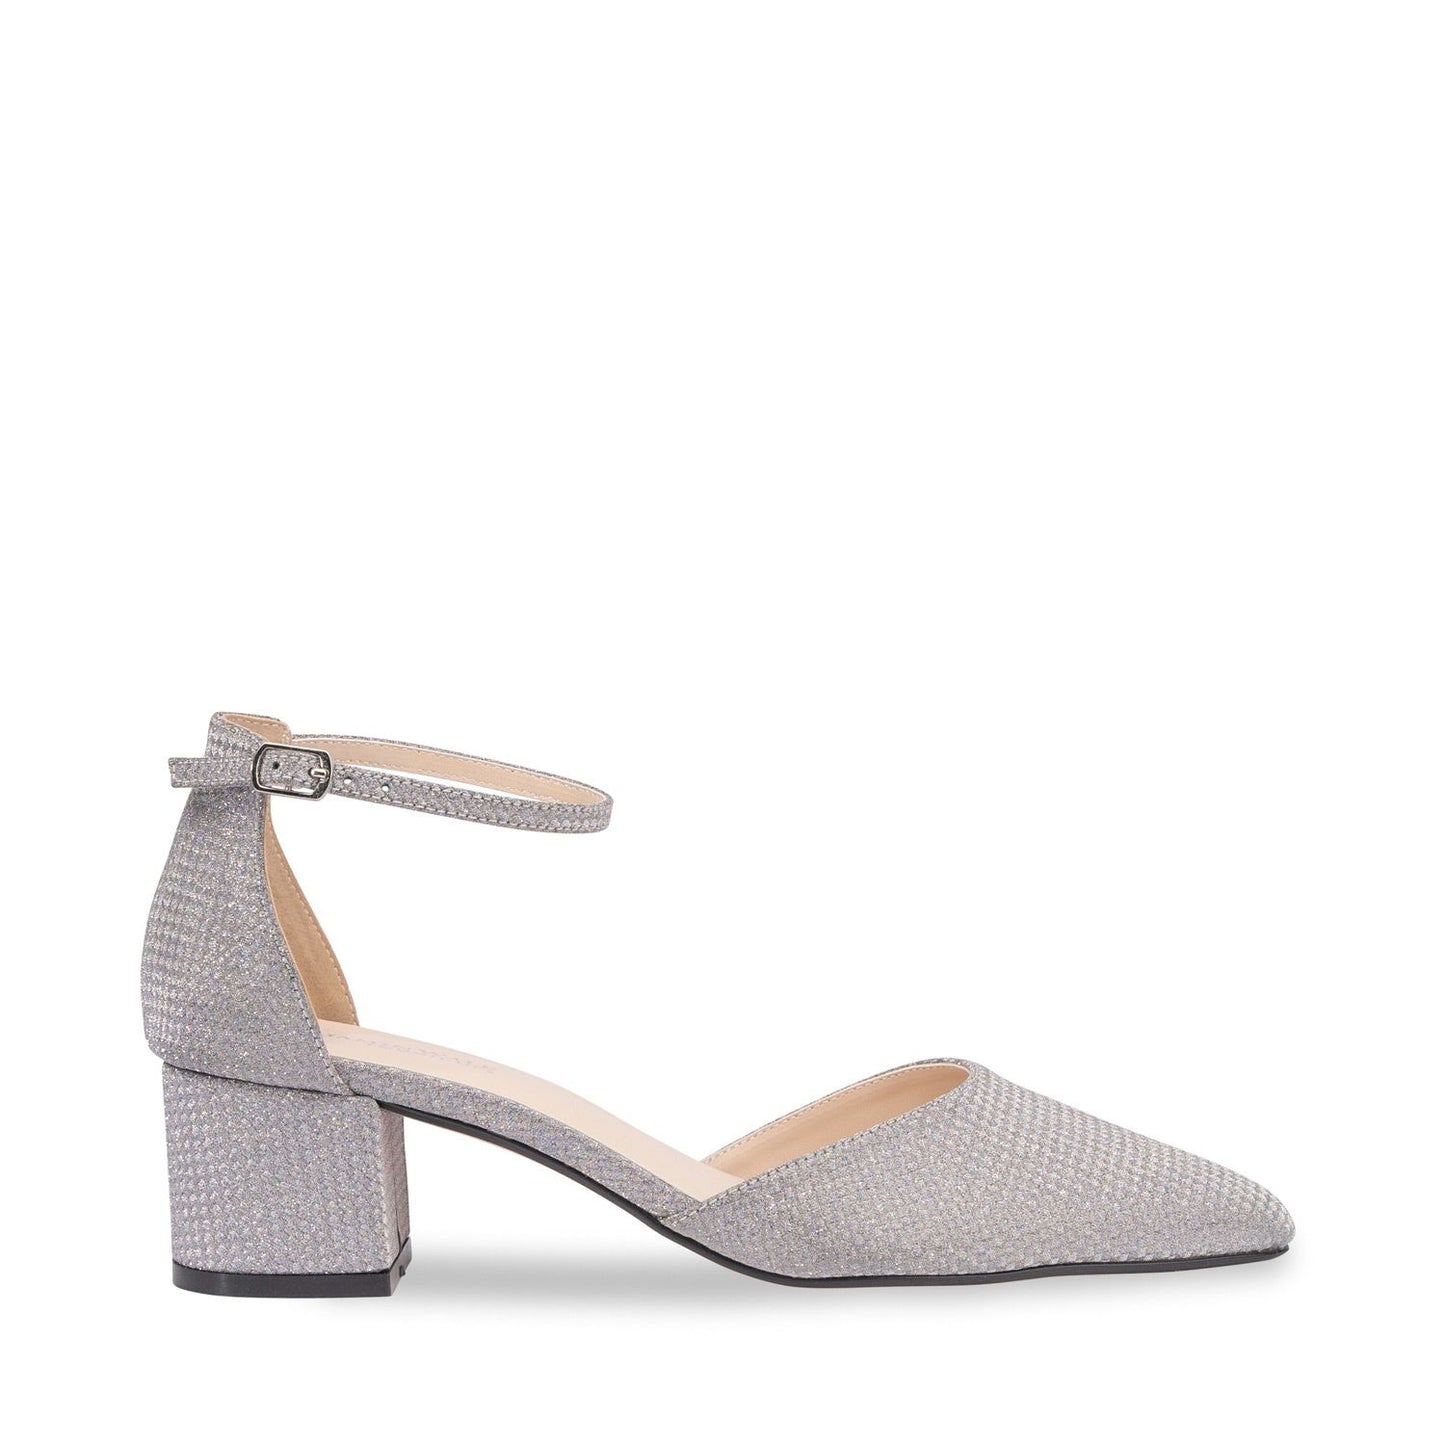 Side view of Closed toe shimmer shoe with 1.75 inch block heel